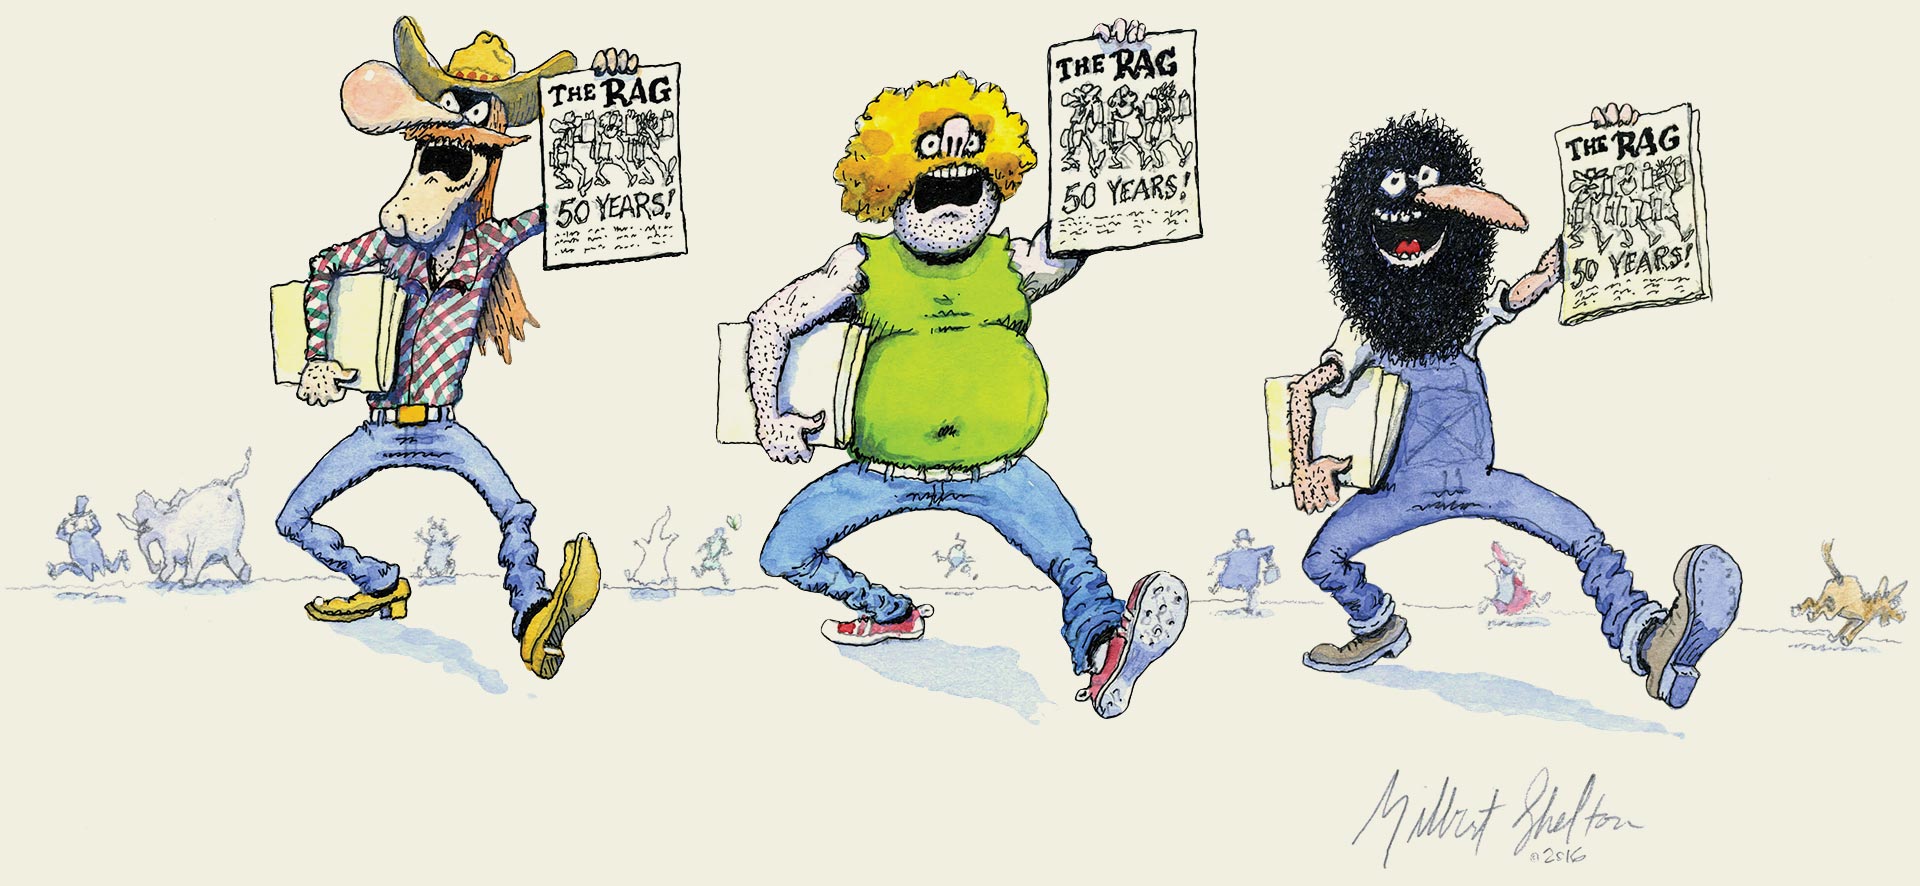 Classic illustration of the 3 freak brothers holding newspapers